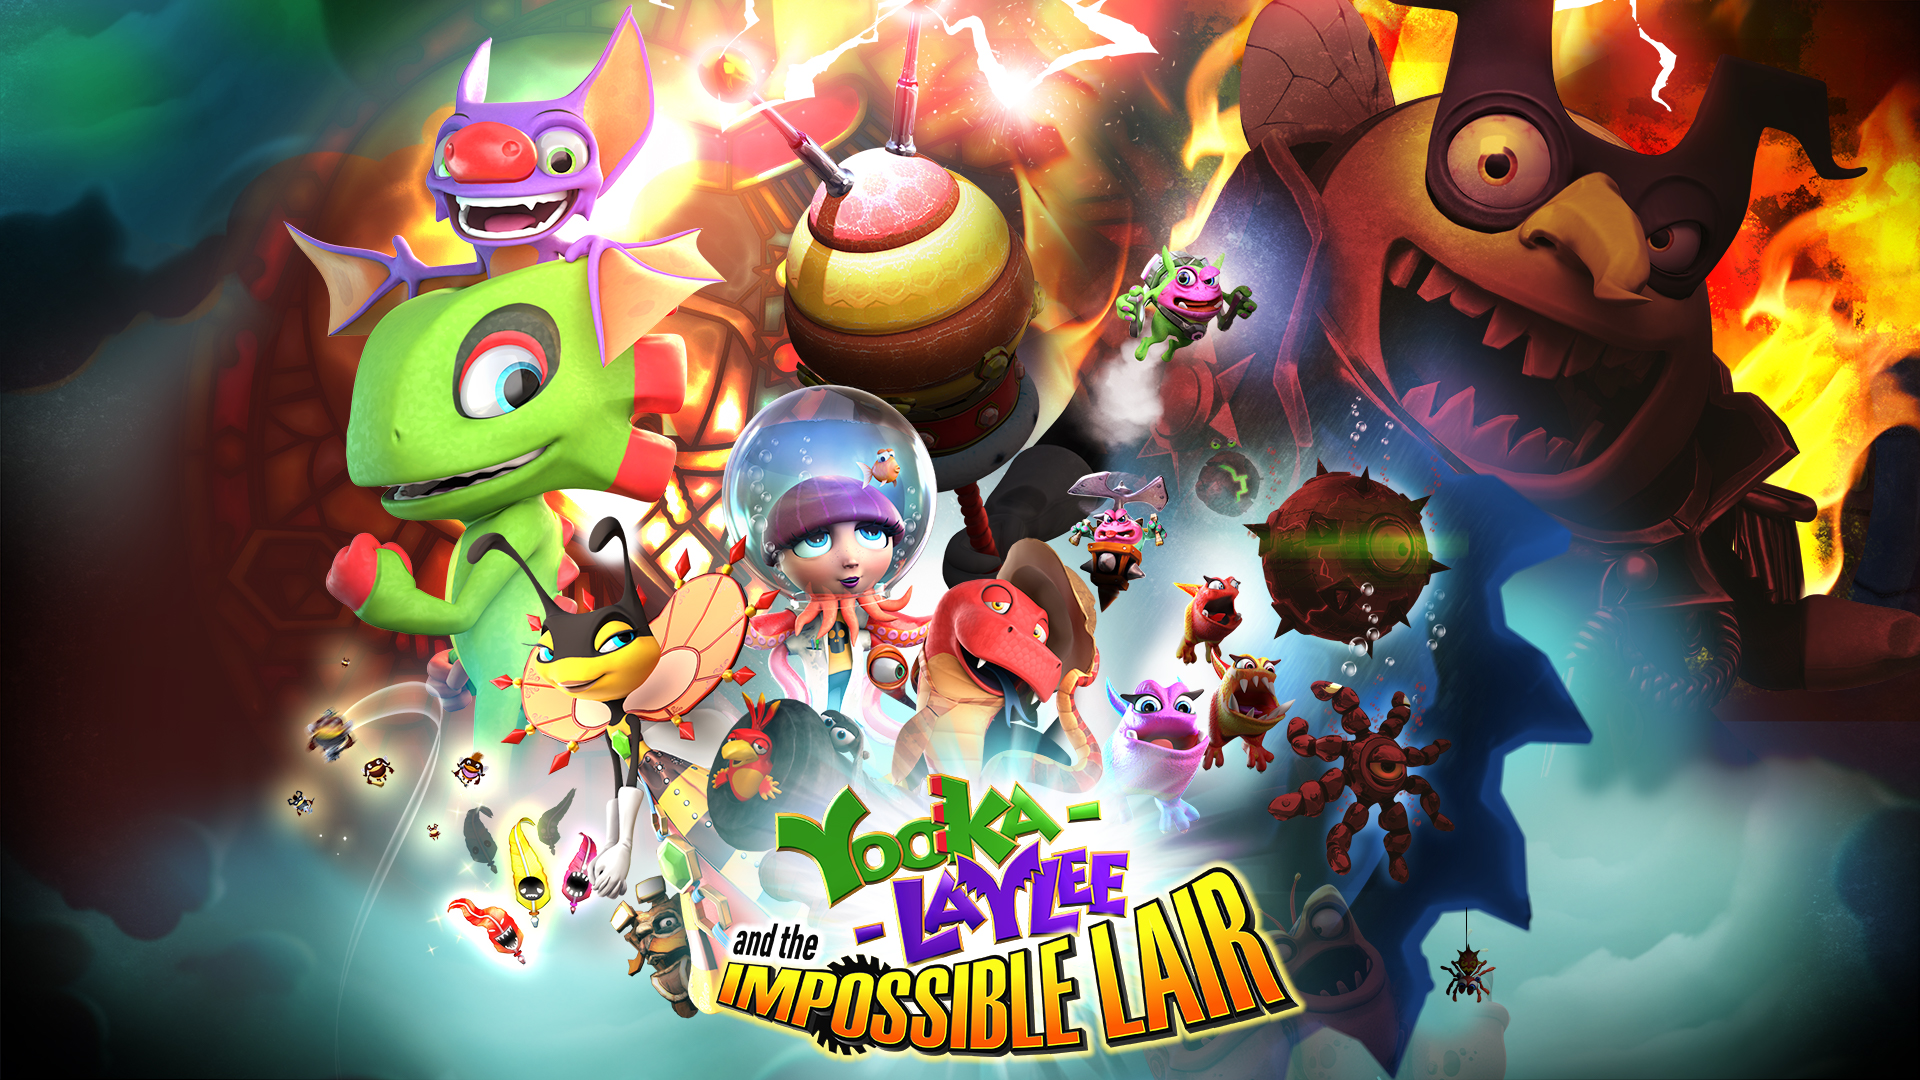 Yooka-Laylee and the Update Laylee Team17 Impossible Today Out Games - Original Spirit Update Lair Yooka- Soon! LTD Digital & The Of - Independent